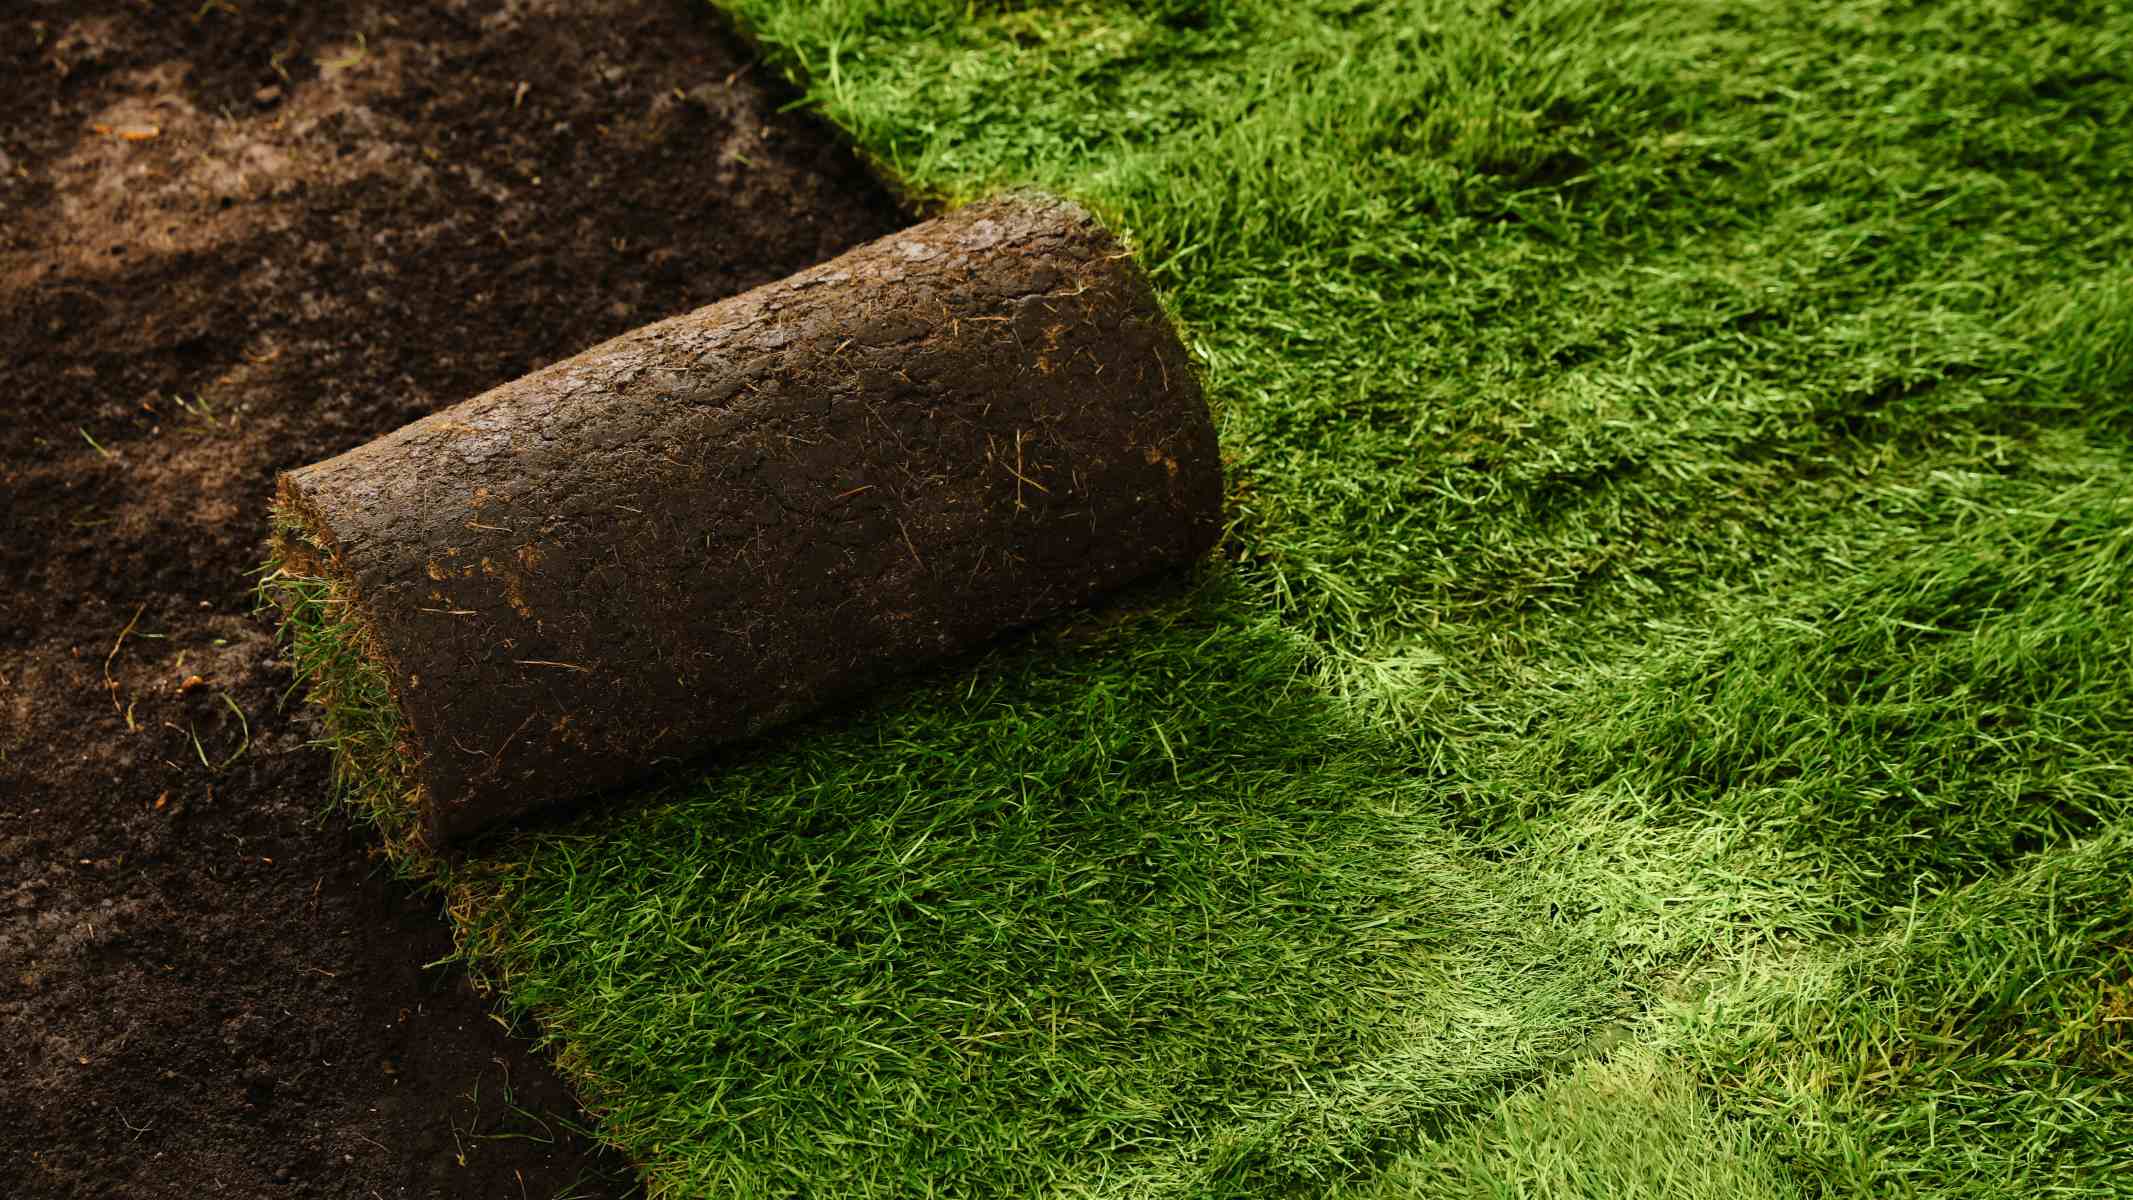 The Ultimate Guide To Laying Sod Over Existing Grass And When To Re-Sod Your Lawn